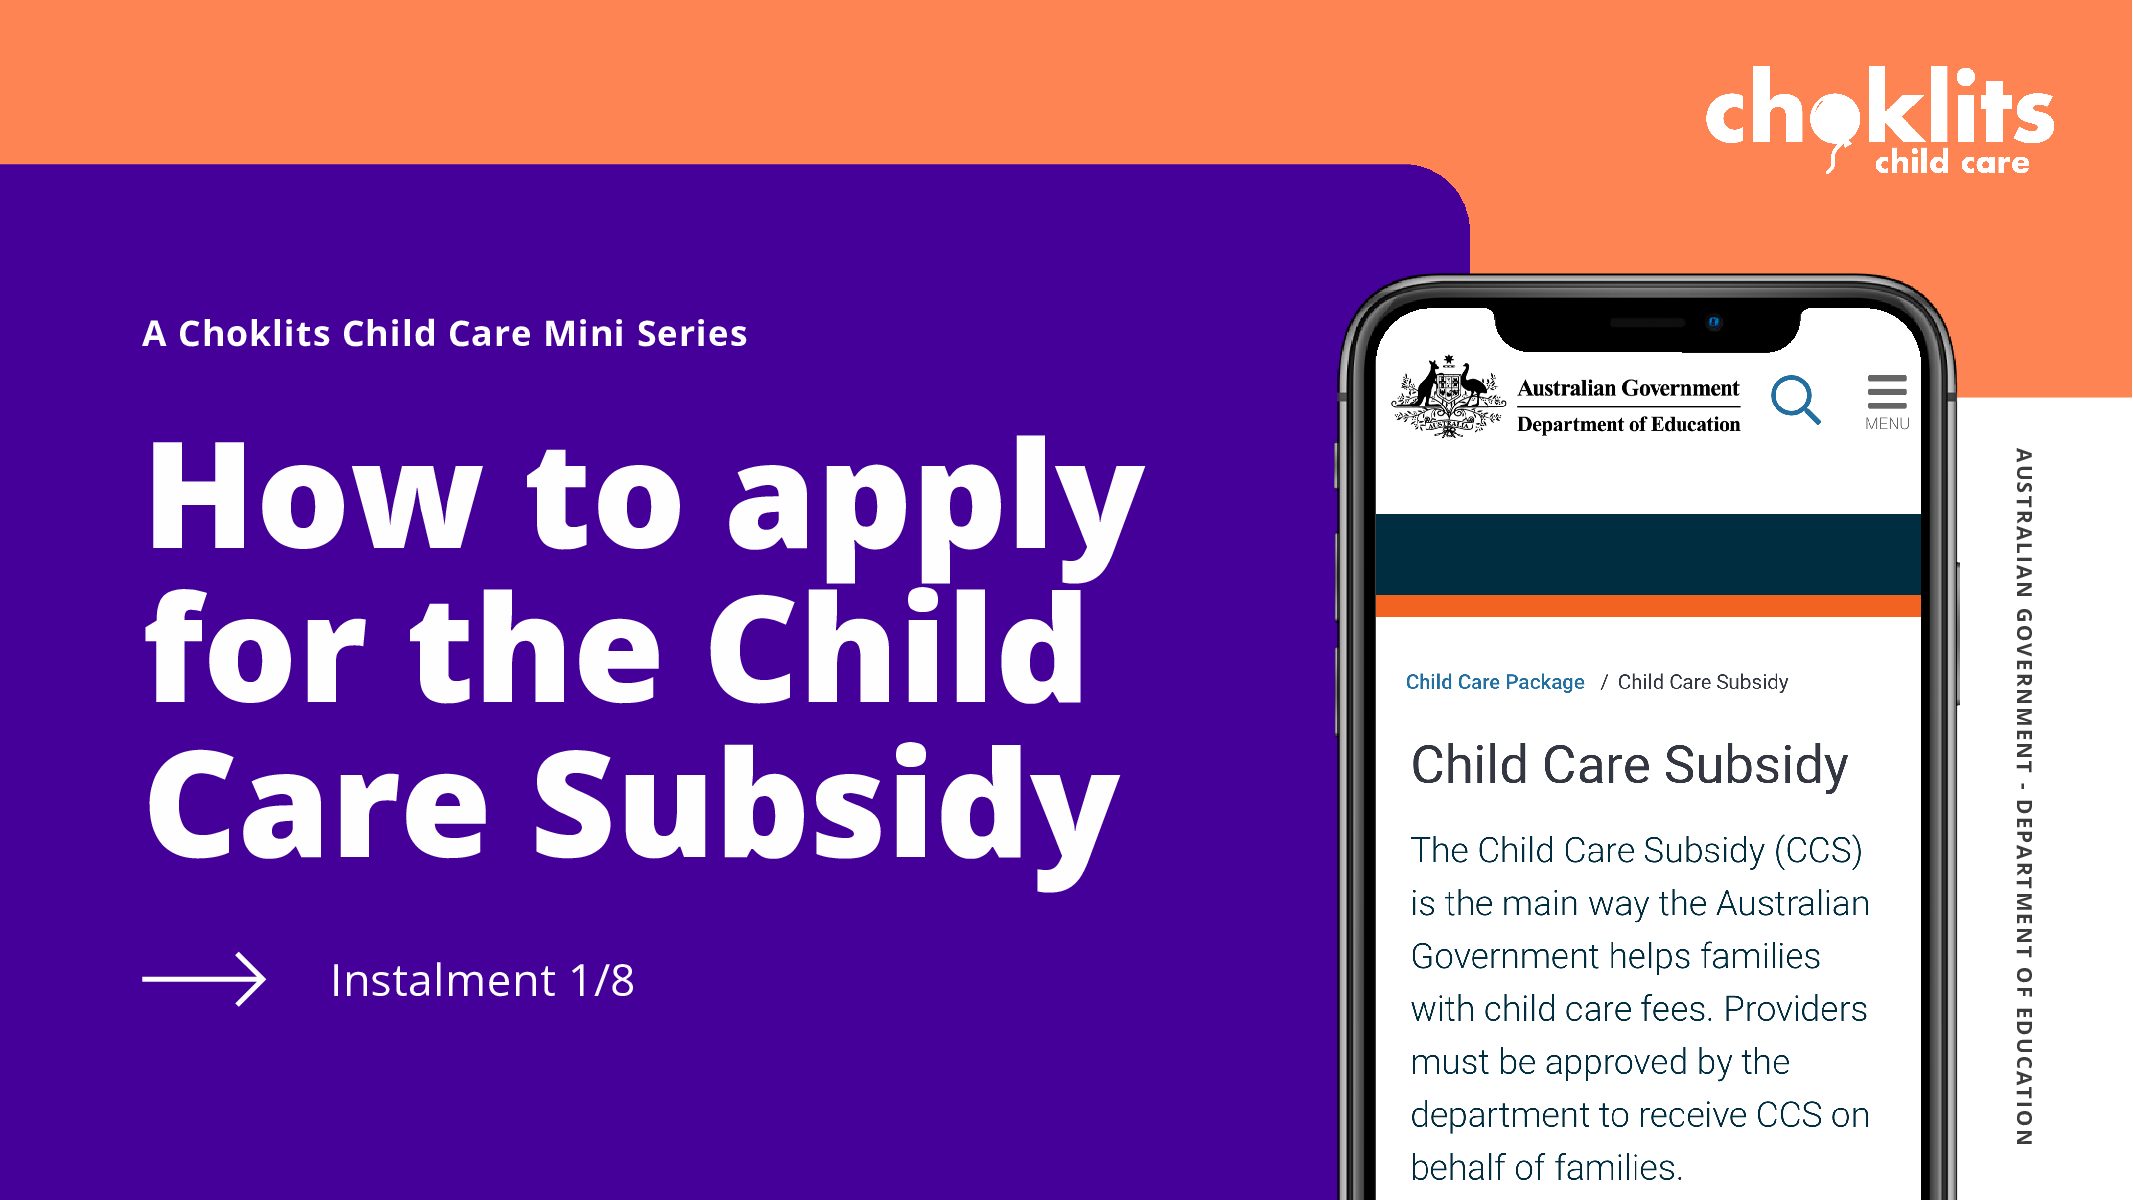 how-to-apply-for-the-child-care-subsidy-choklits-child-care